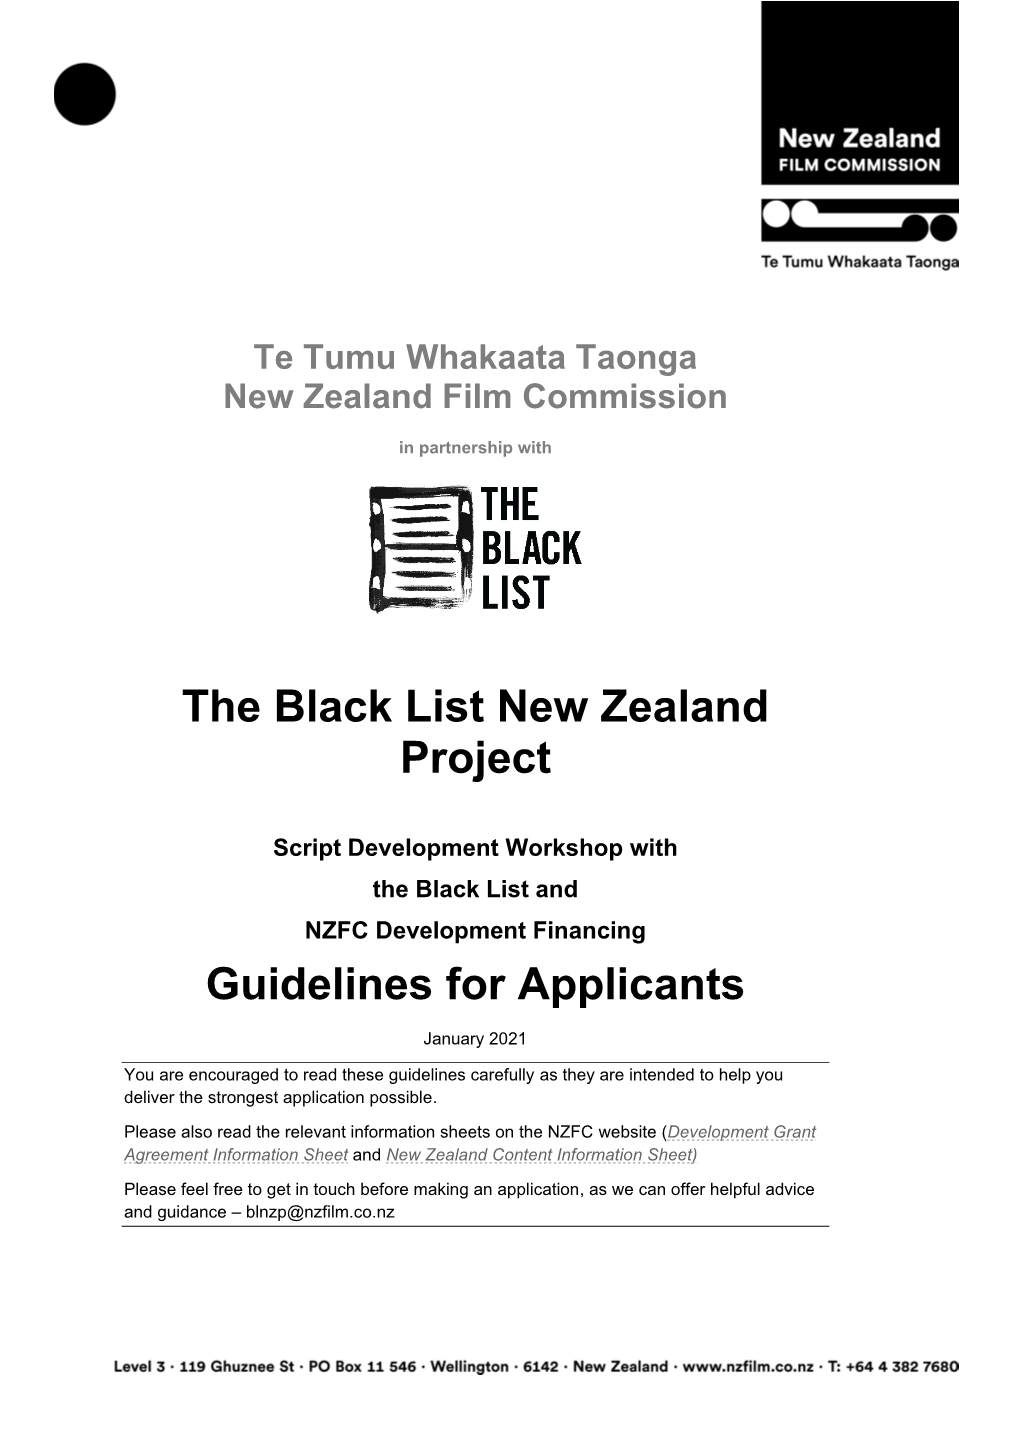 The Black List New Zealand Project Guidelines for Applicants